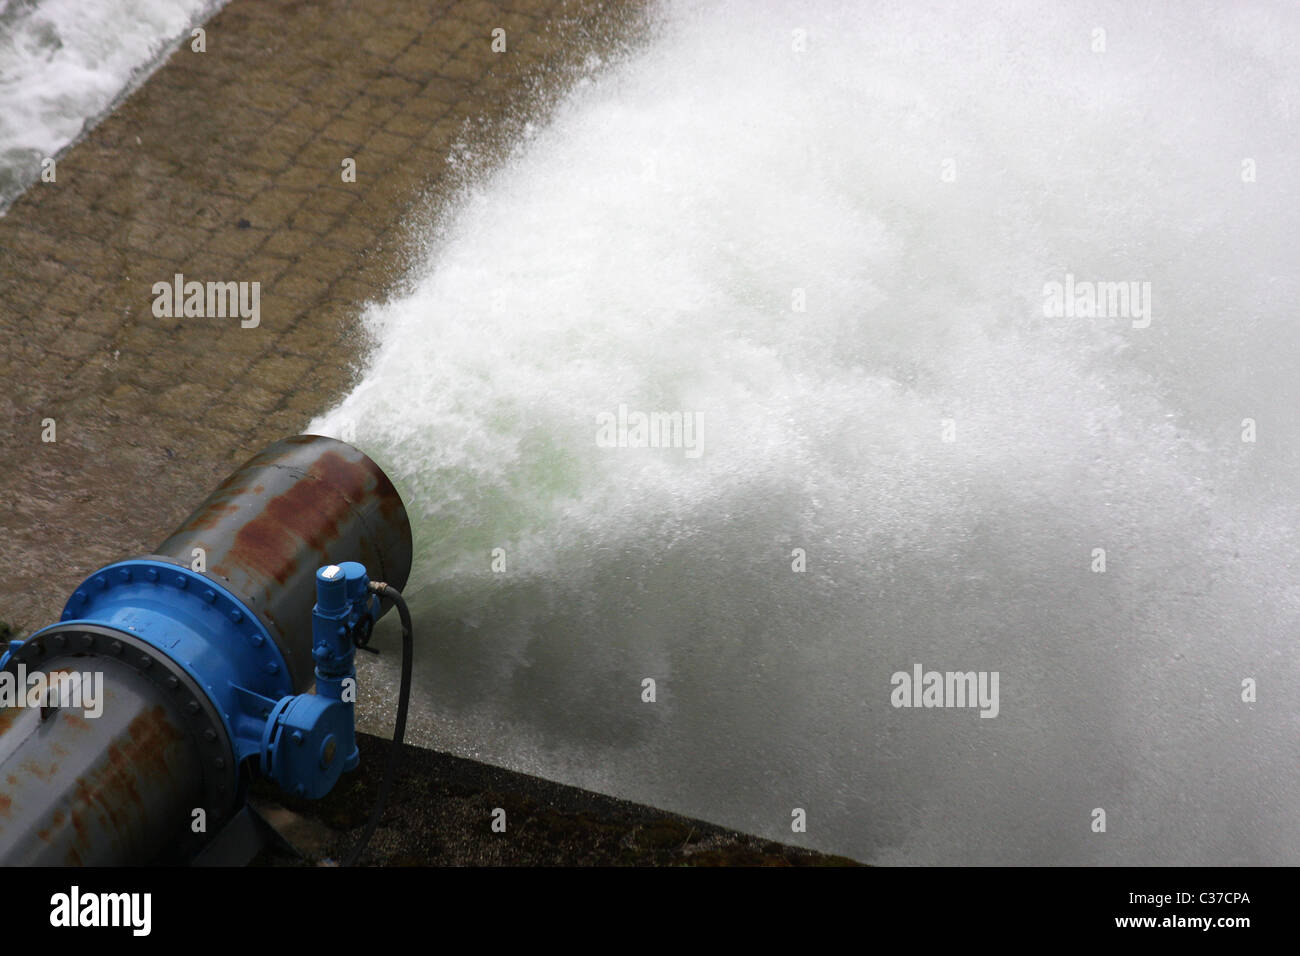 Water gushing from a pipe under great pressure Stock Photo - Alamy